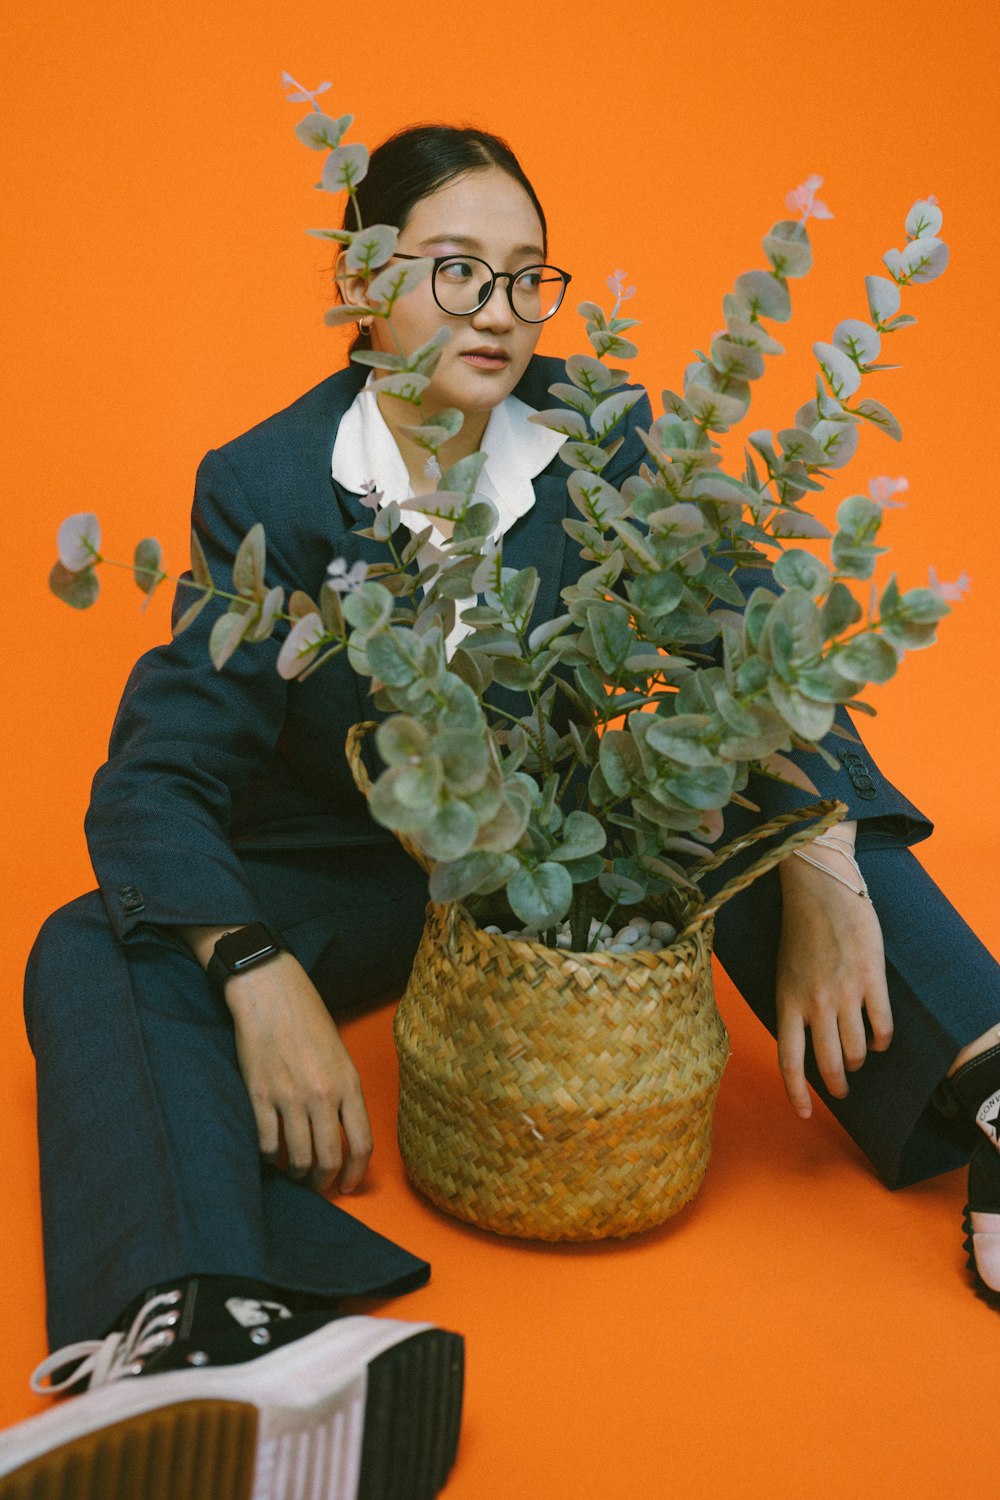 a person sitting on a chair with a vase of flowers